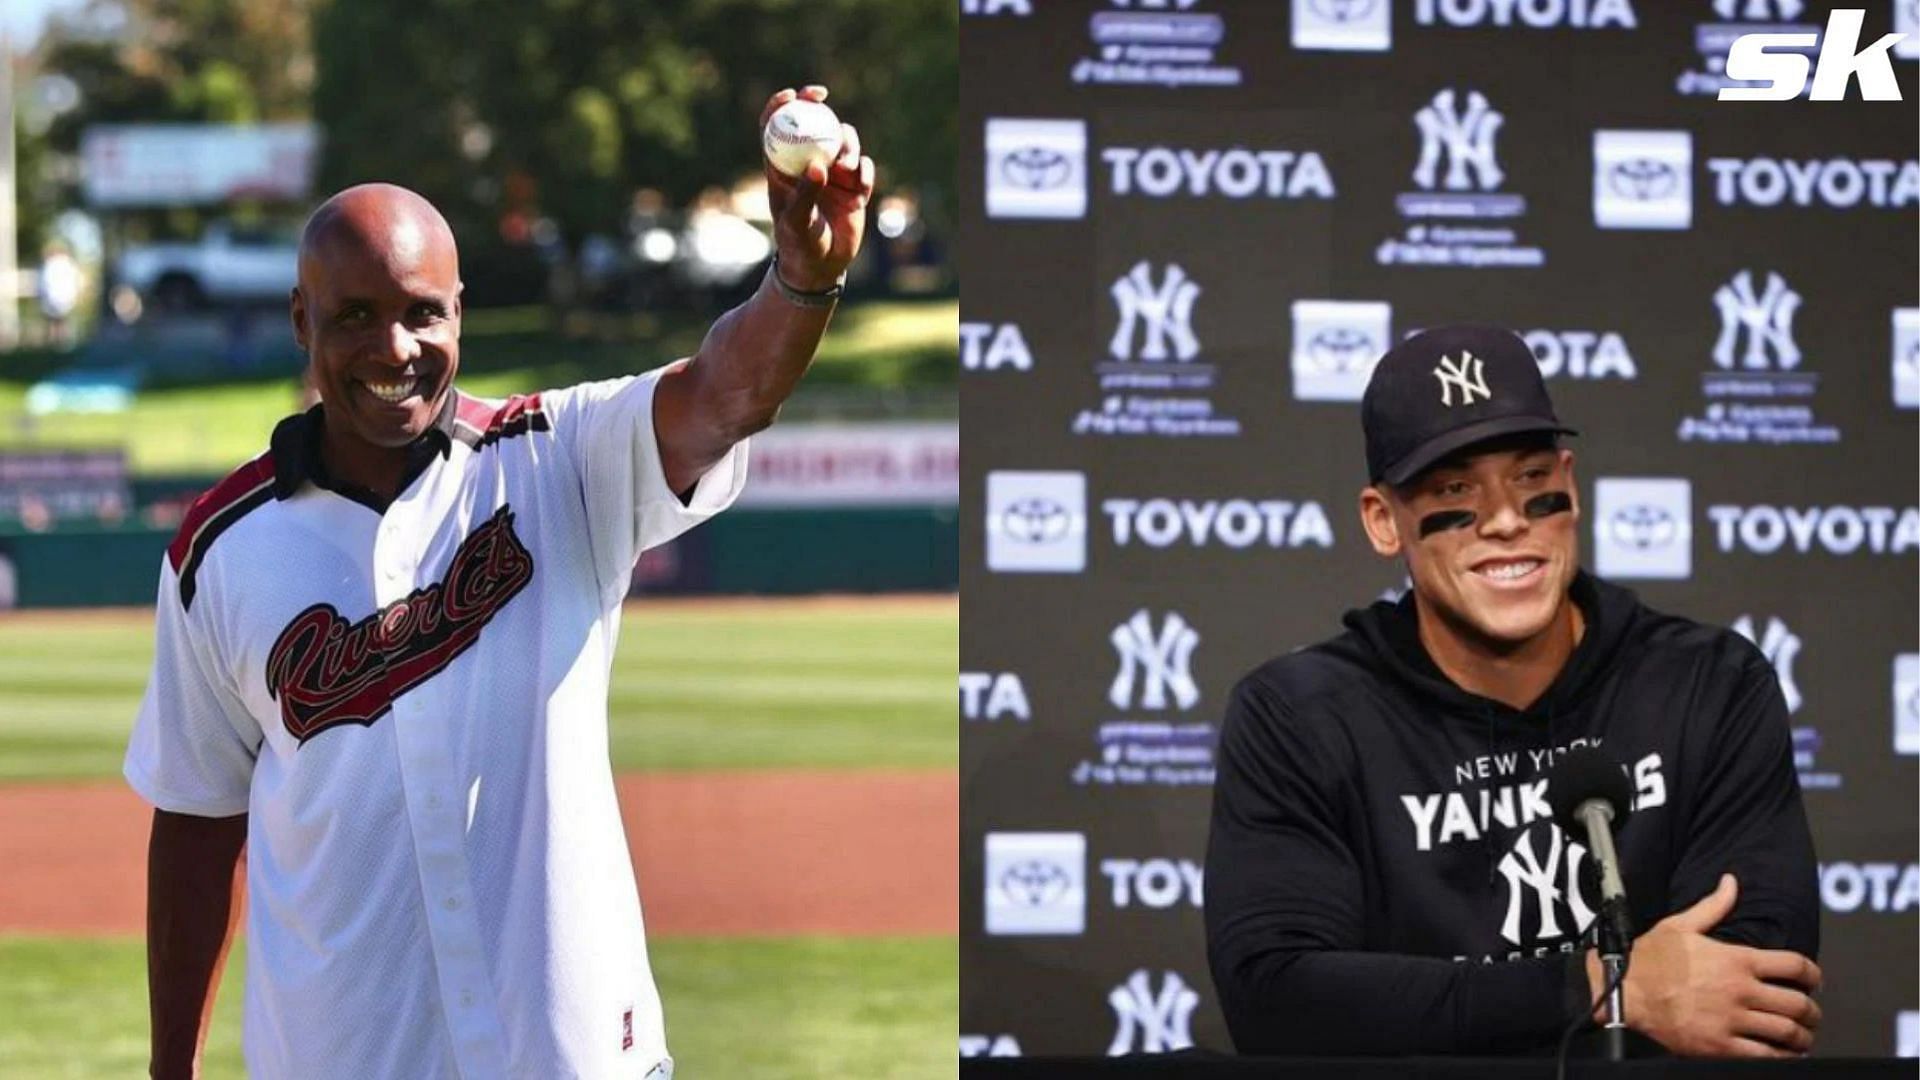 Barry Bonds expressed his desire to see Aaron Judge in the Bay Area in the upcoming MLB season